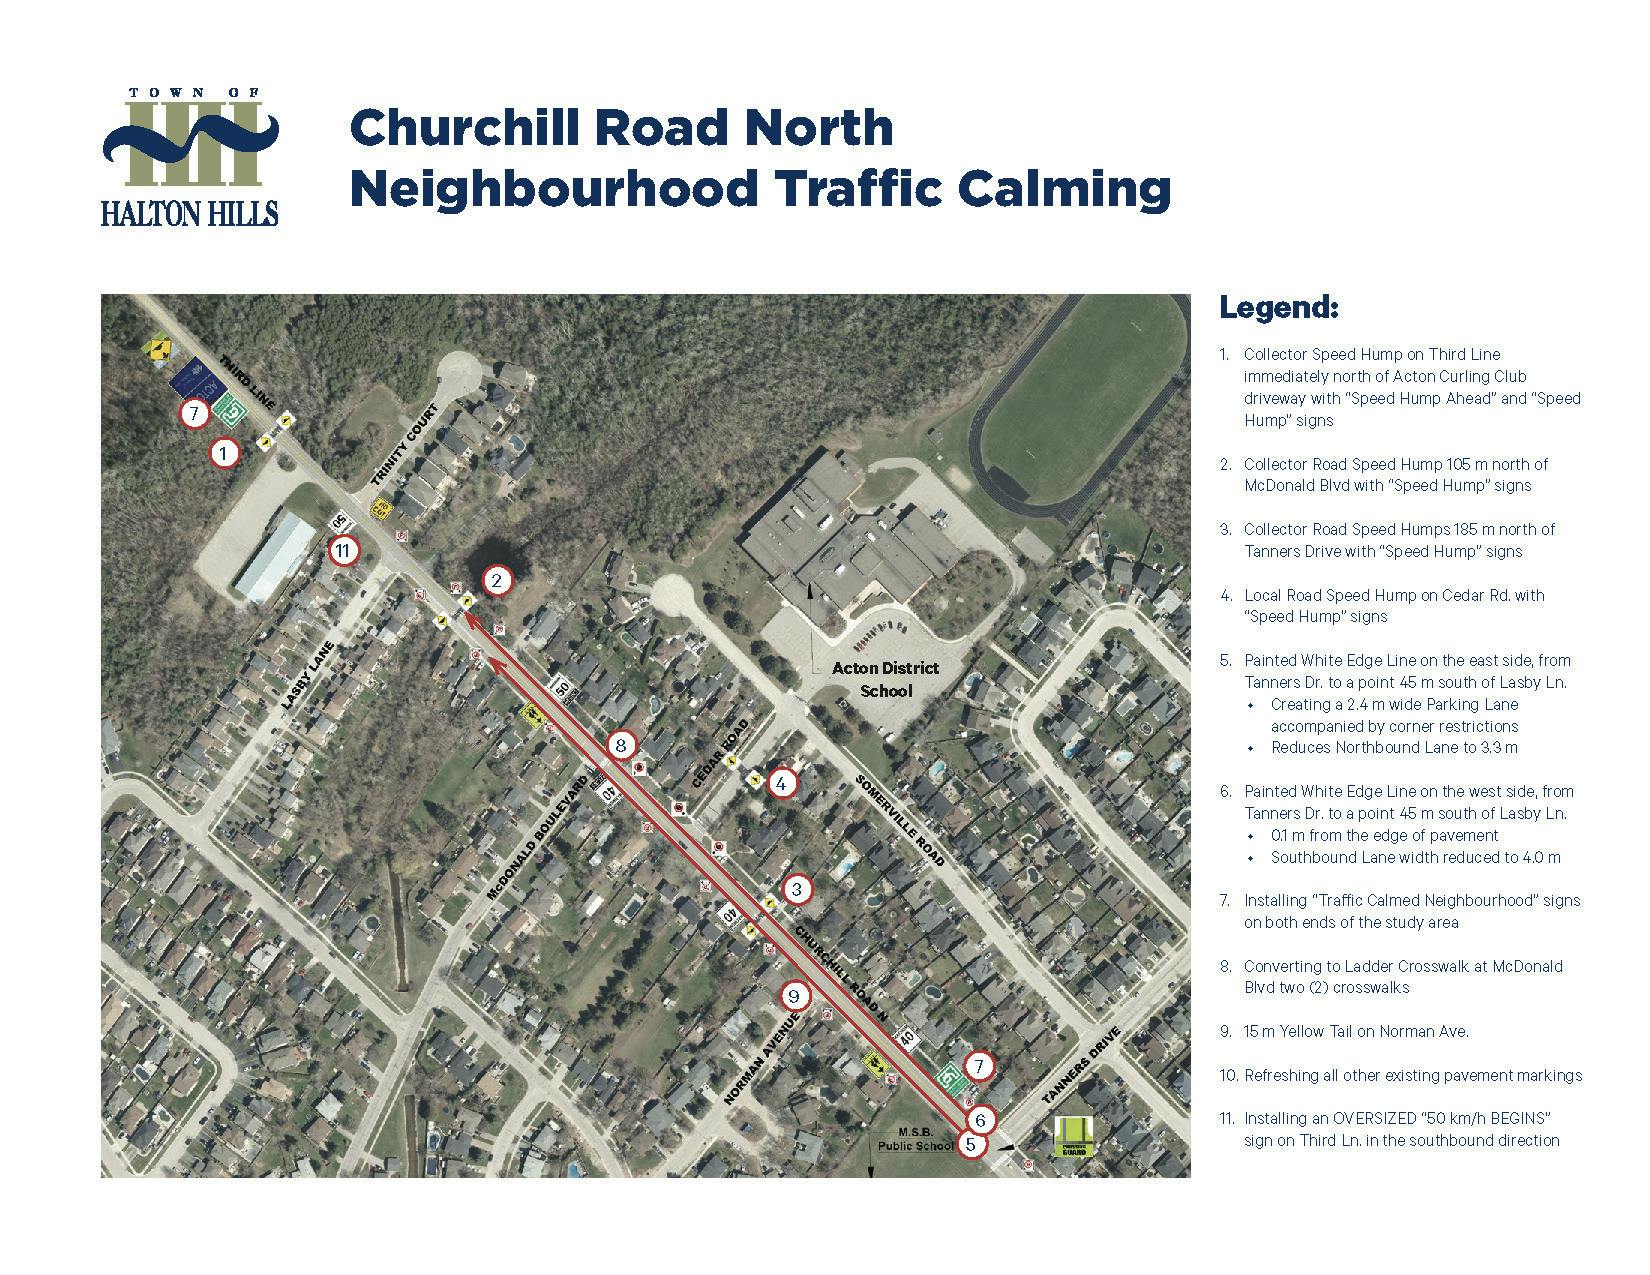 Churchill Road North Traffic Calming_Proposed 2021 Measures.jpg